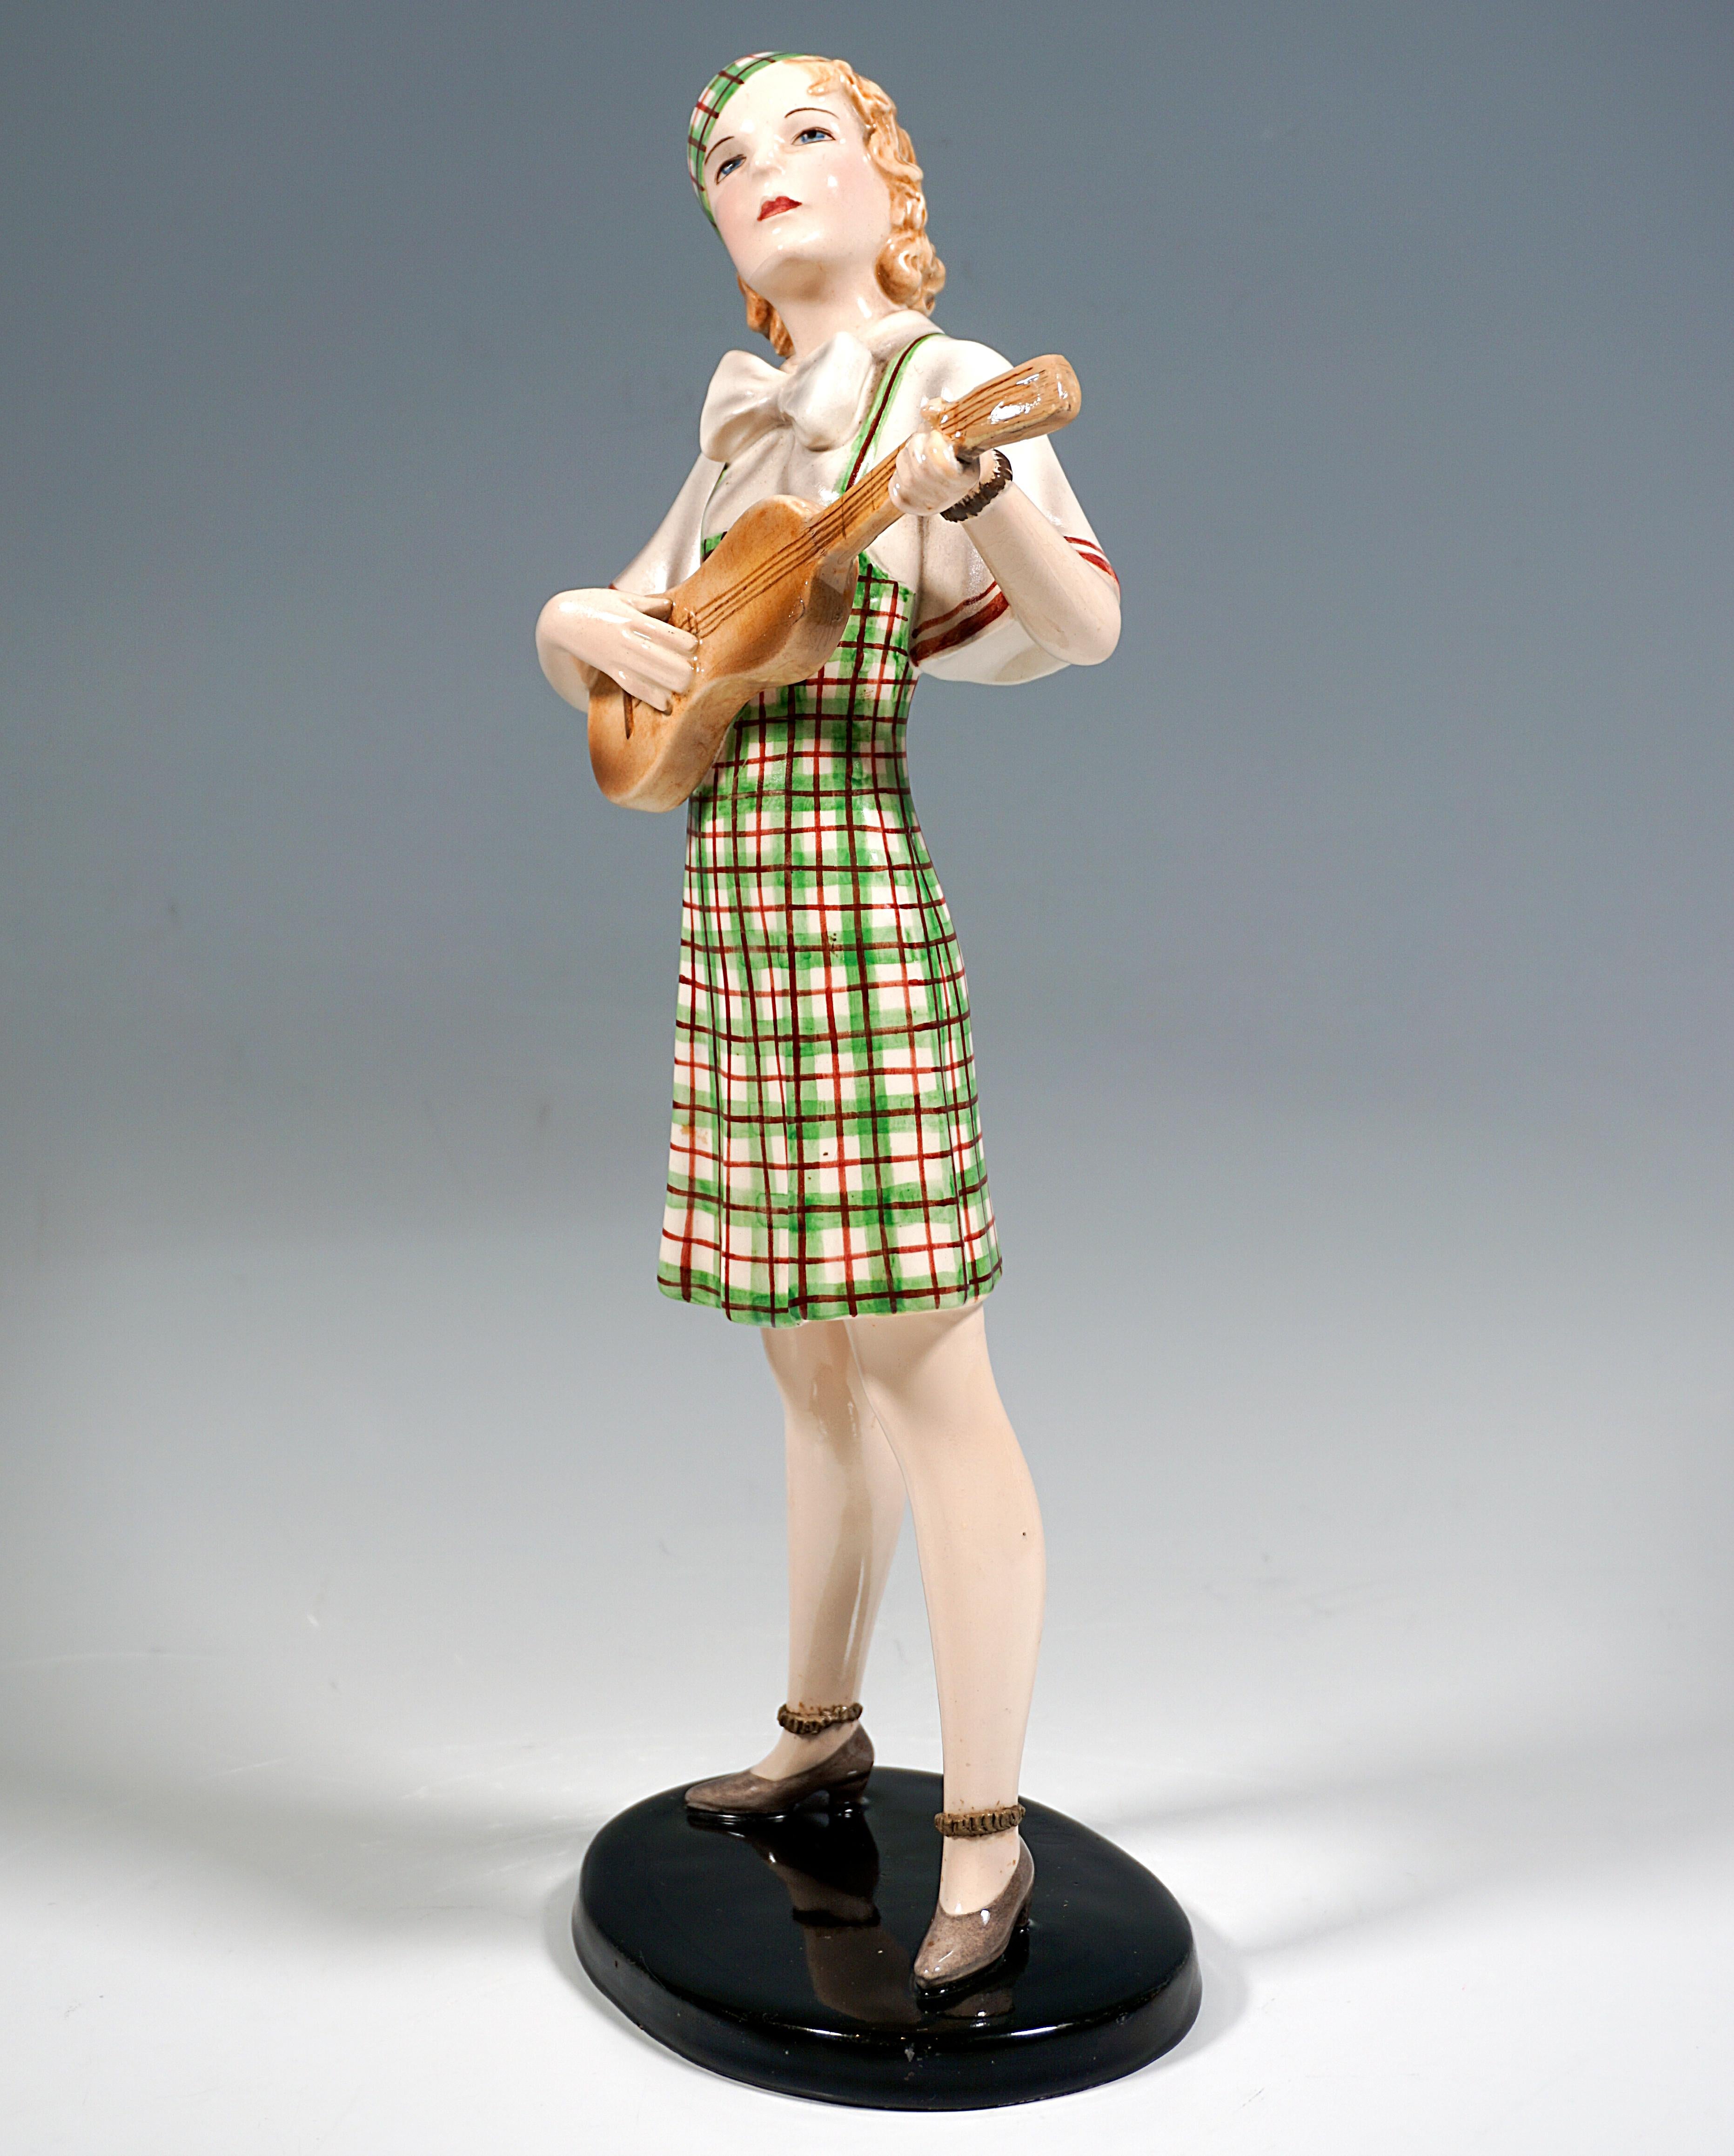 Hand-Crafted Goldscheider Art Déco Figurine, Girl with Ukulele, by Stephan Dakon, Ca 1937 For Sale